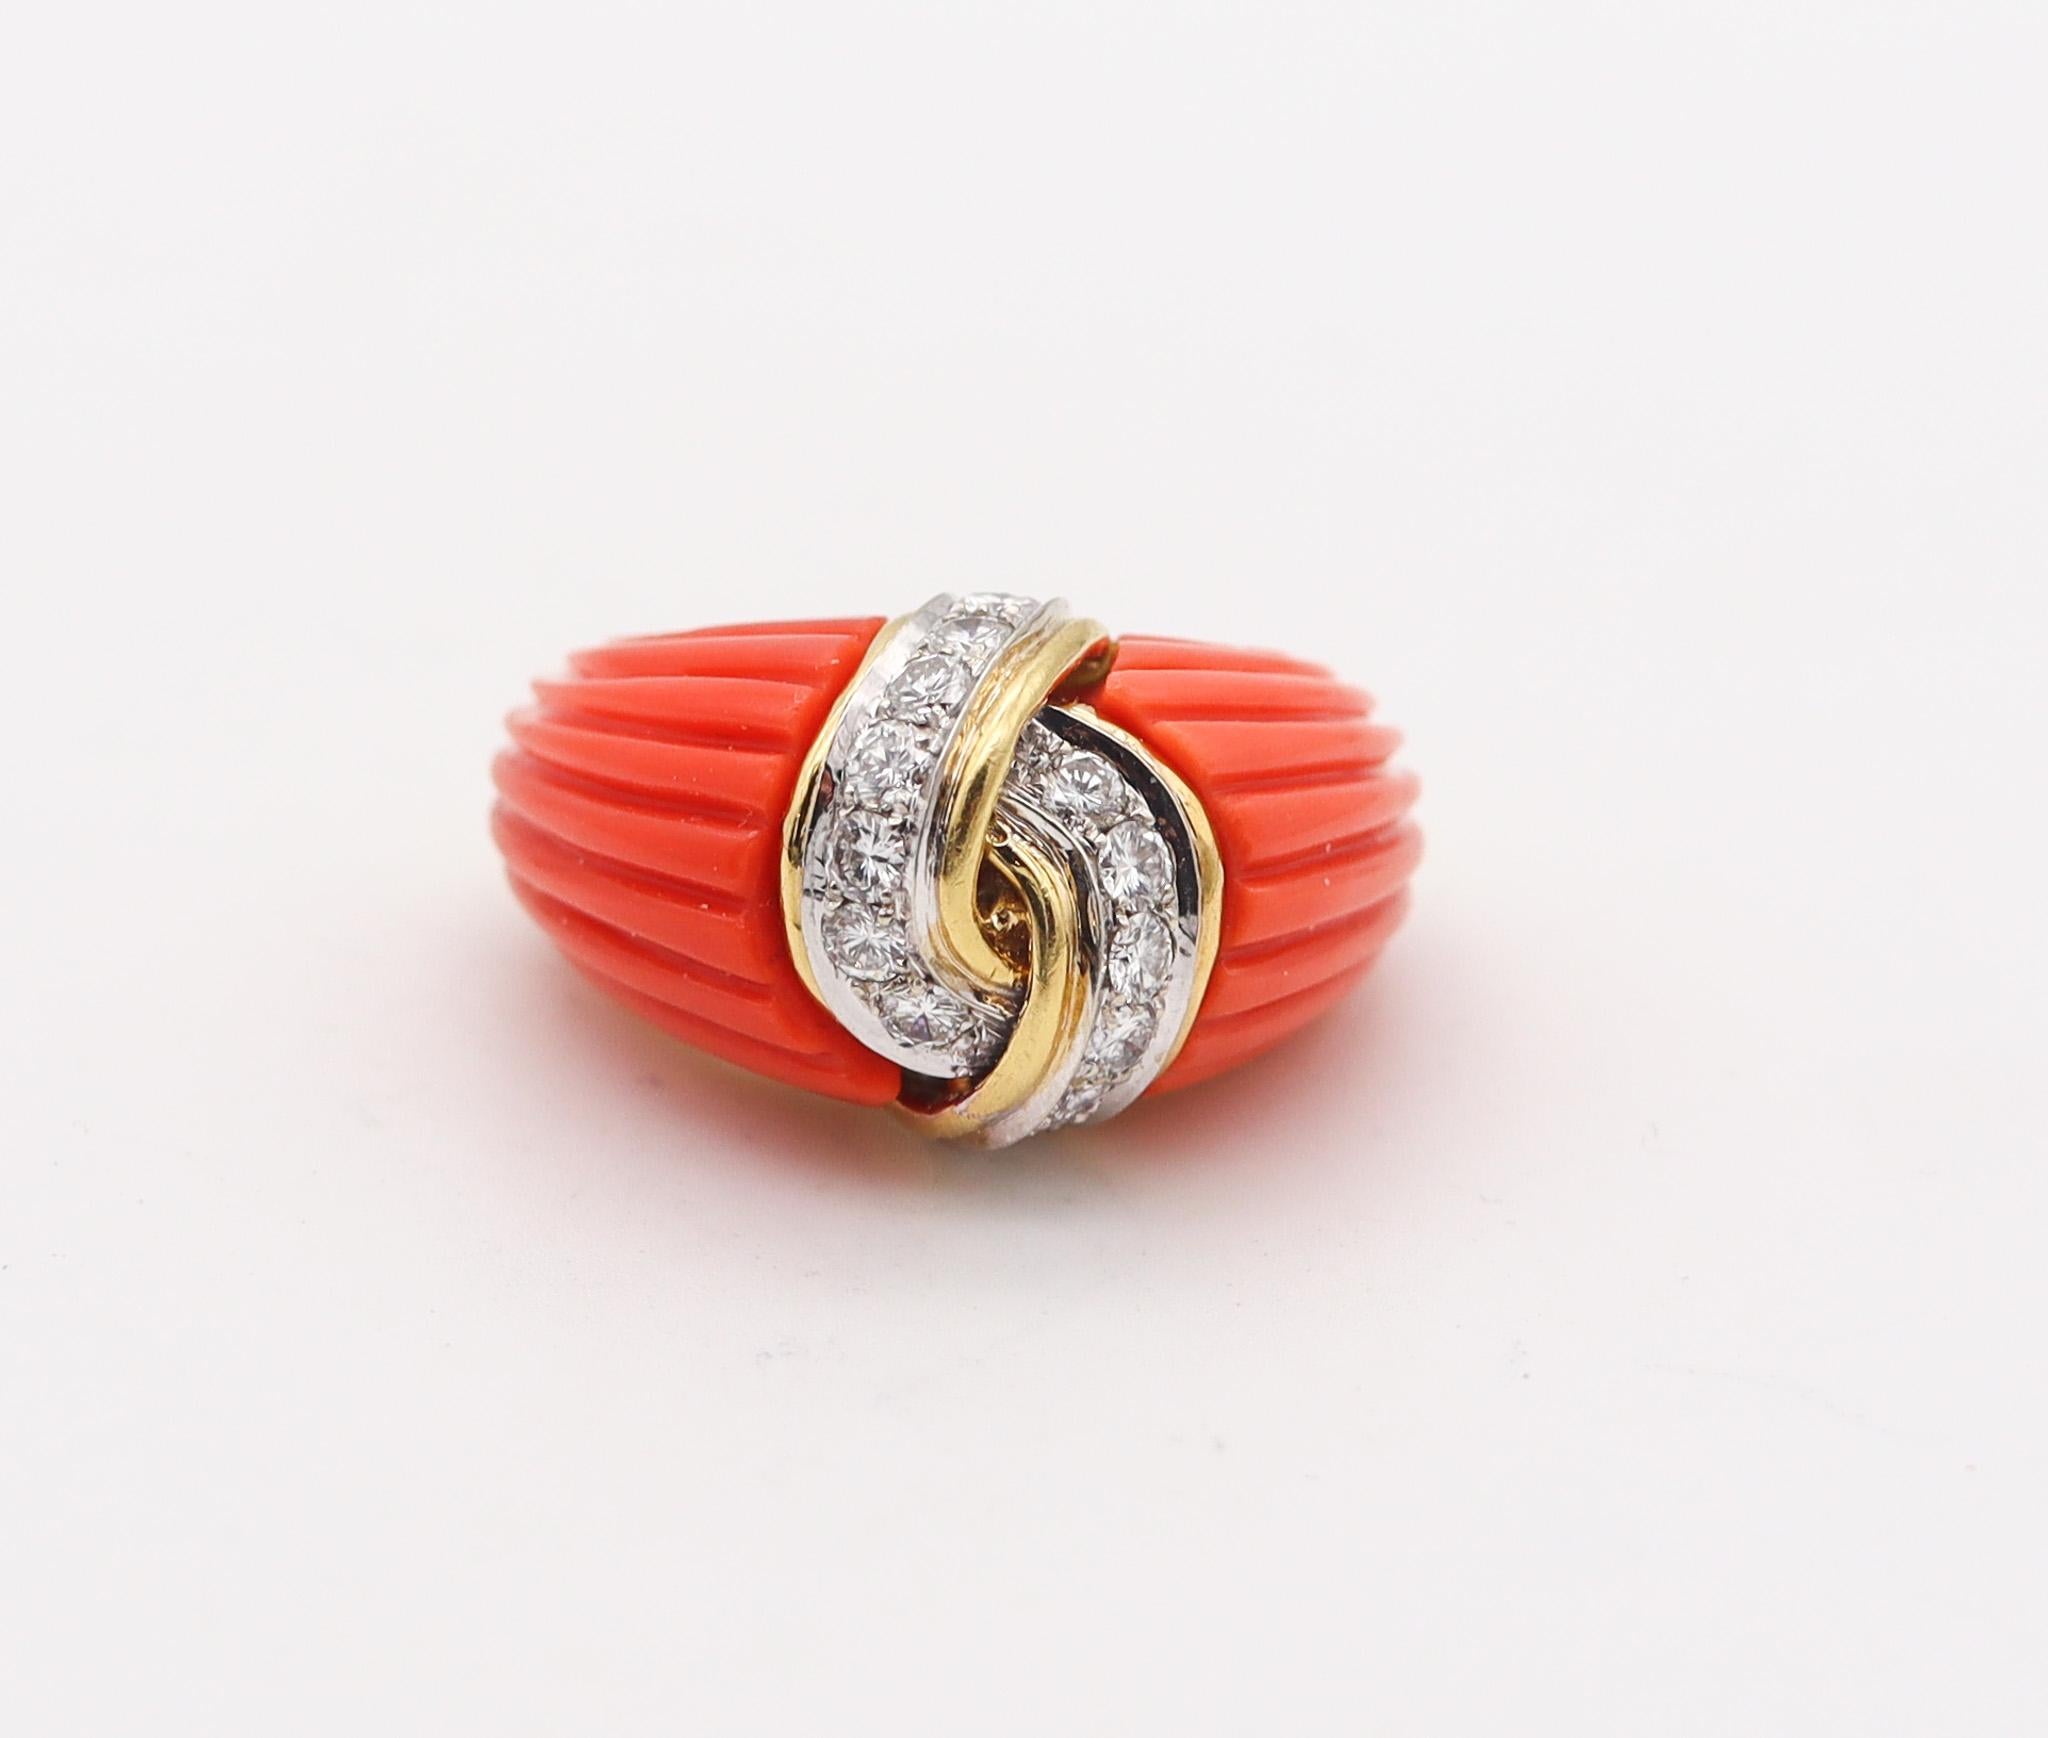 Brilliant Cut Italian 1970 Modernist Cocktail Ring 18Kt Gold With 21.60 Ctw Diamonds And Coral For Sale